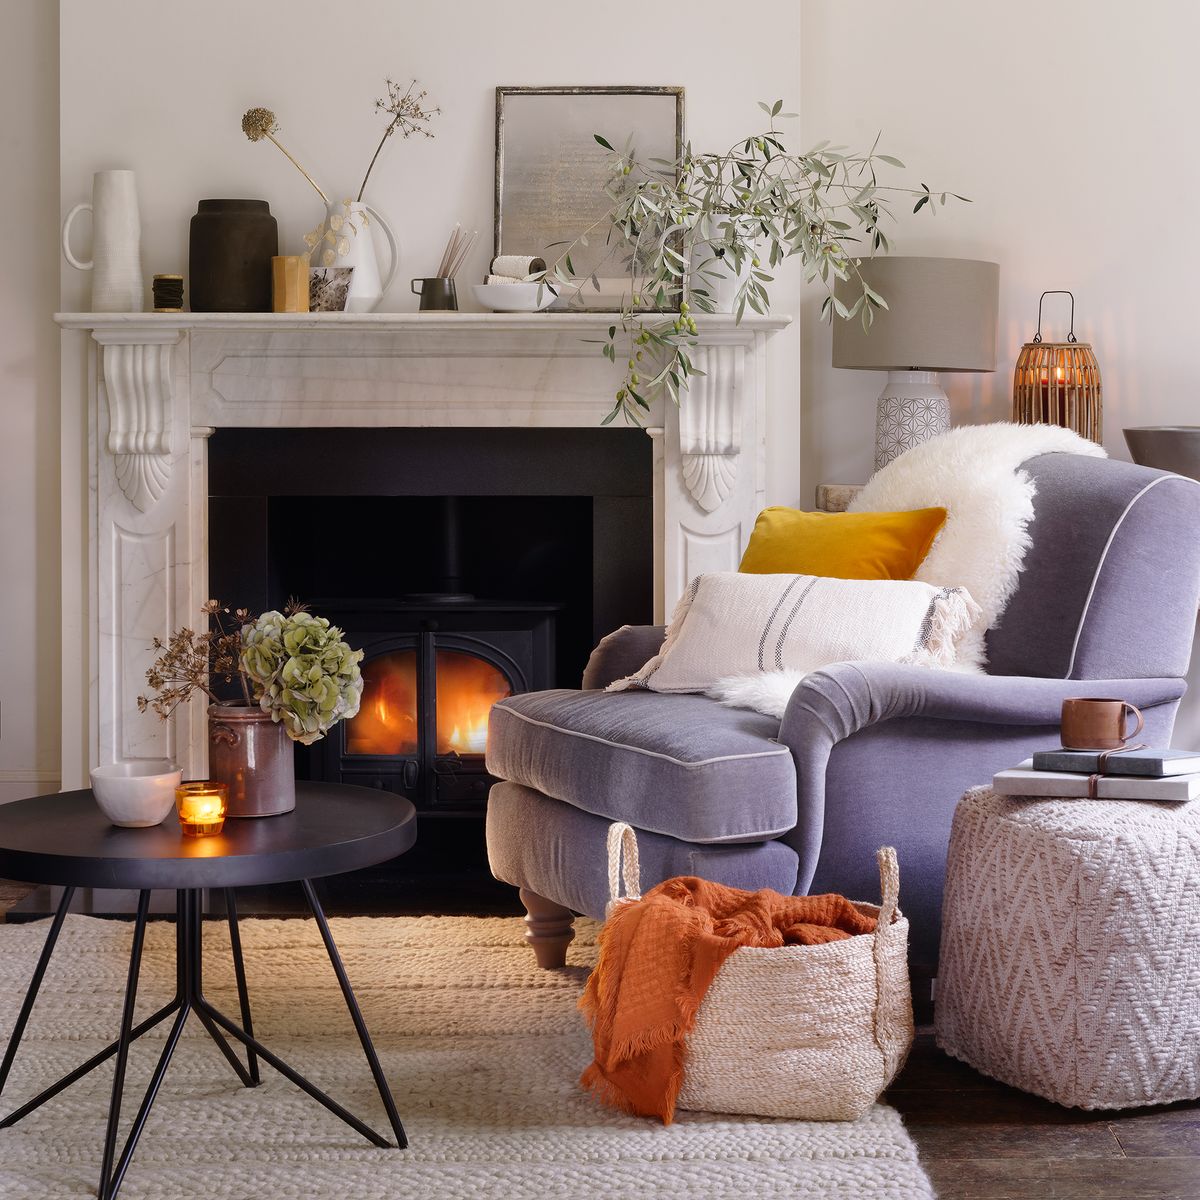 The homify guide to creating a cosy living room